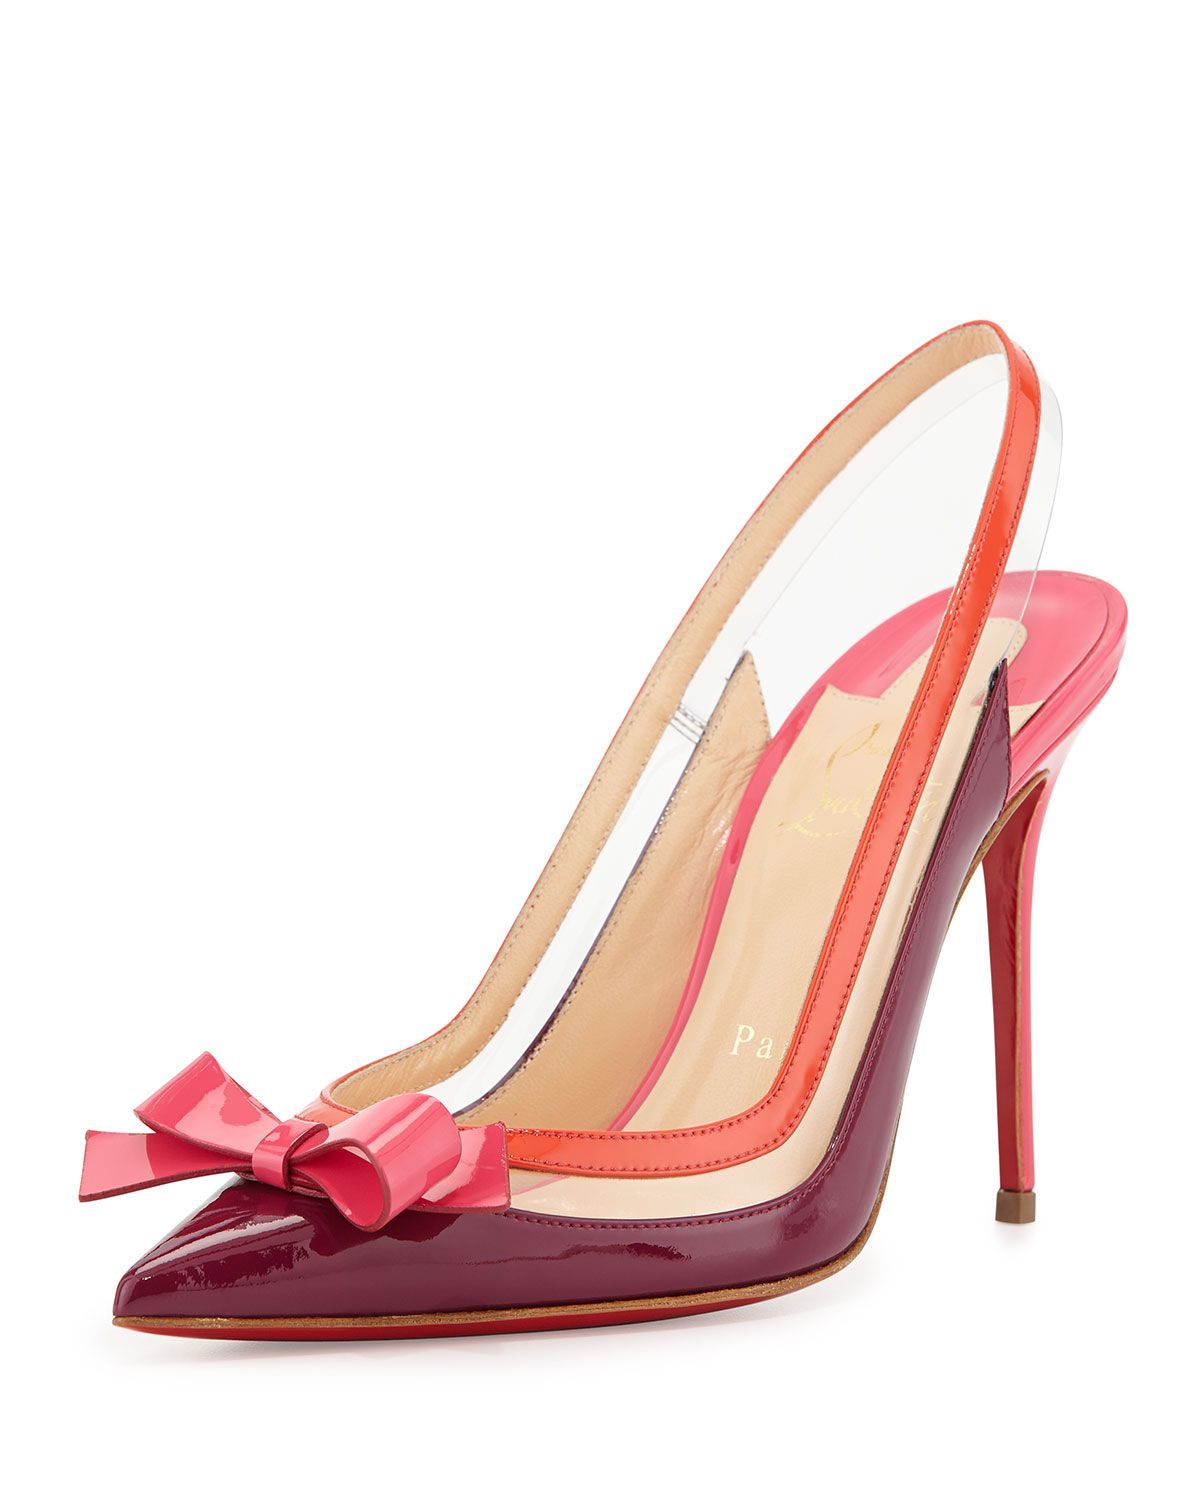 #NYFW #Christian #Louboutin Worthy Of Your Love And Buy It Home